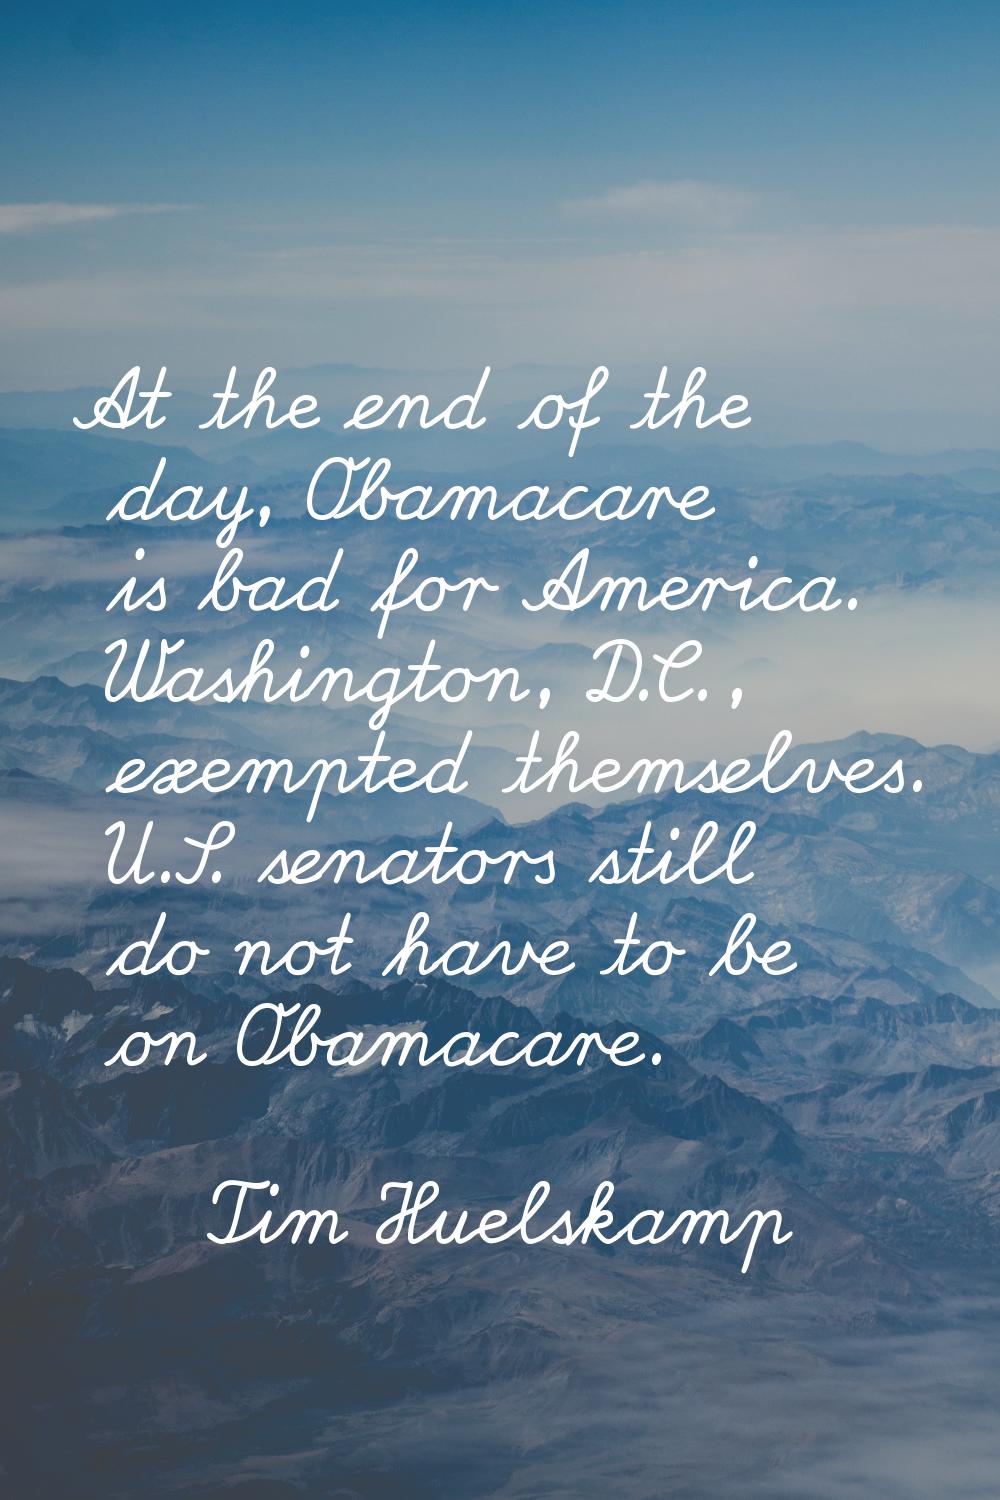 At the end of the day, Obamacare is bad for America. Washington, D.C., exempted themselves. U.S. se